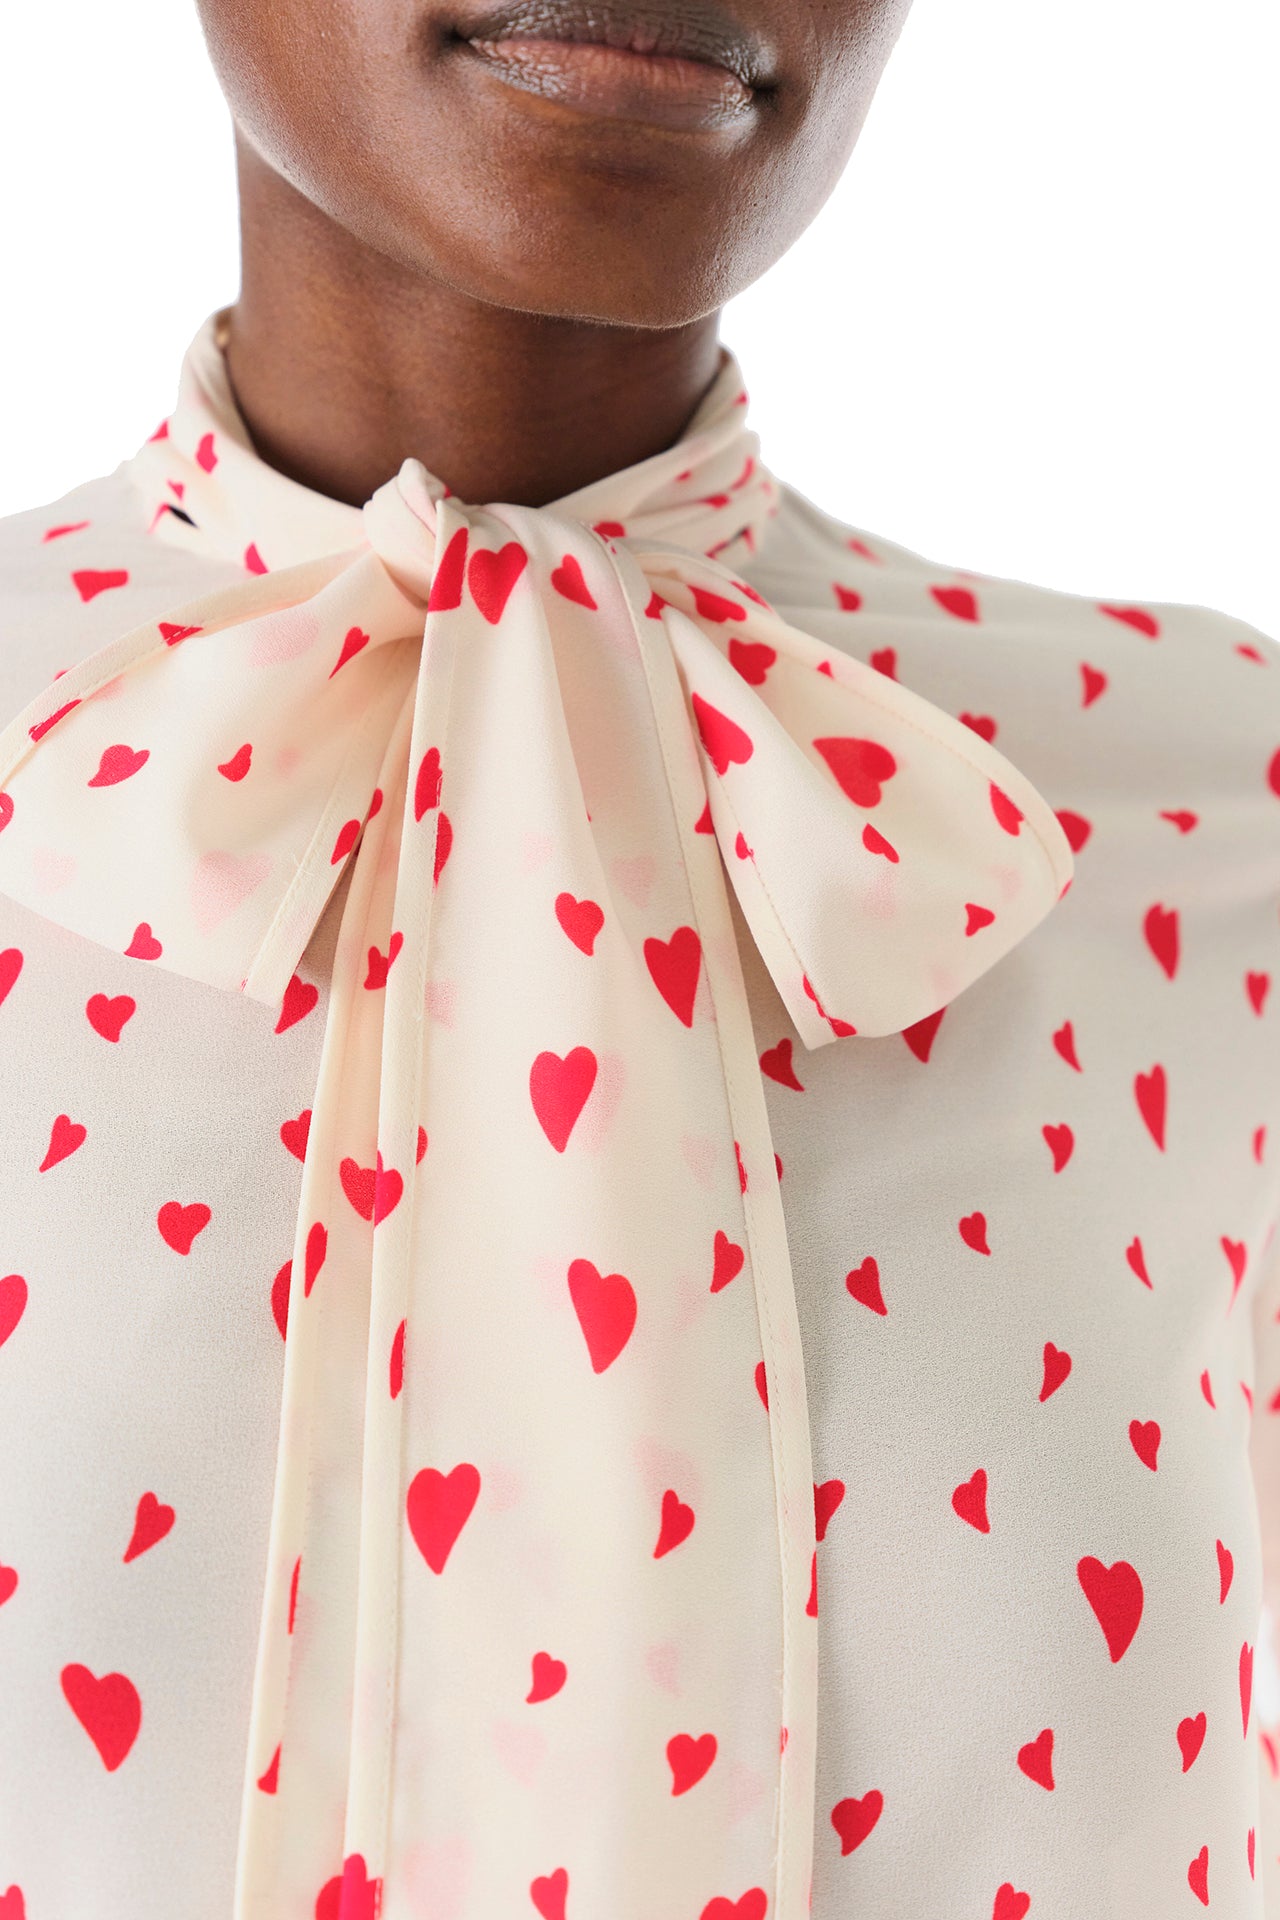 Monique Lhuillier Fall 2024 long sleeve, bow tie blouse in Heart Printed Georgette - bow tie detail.